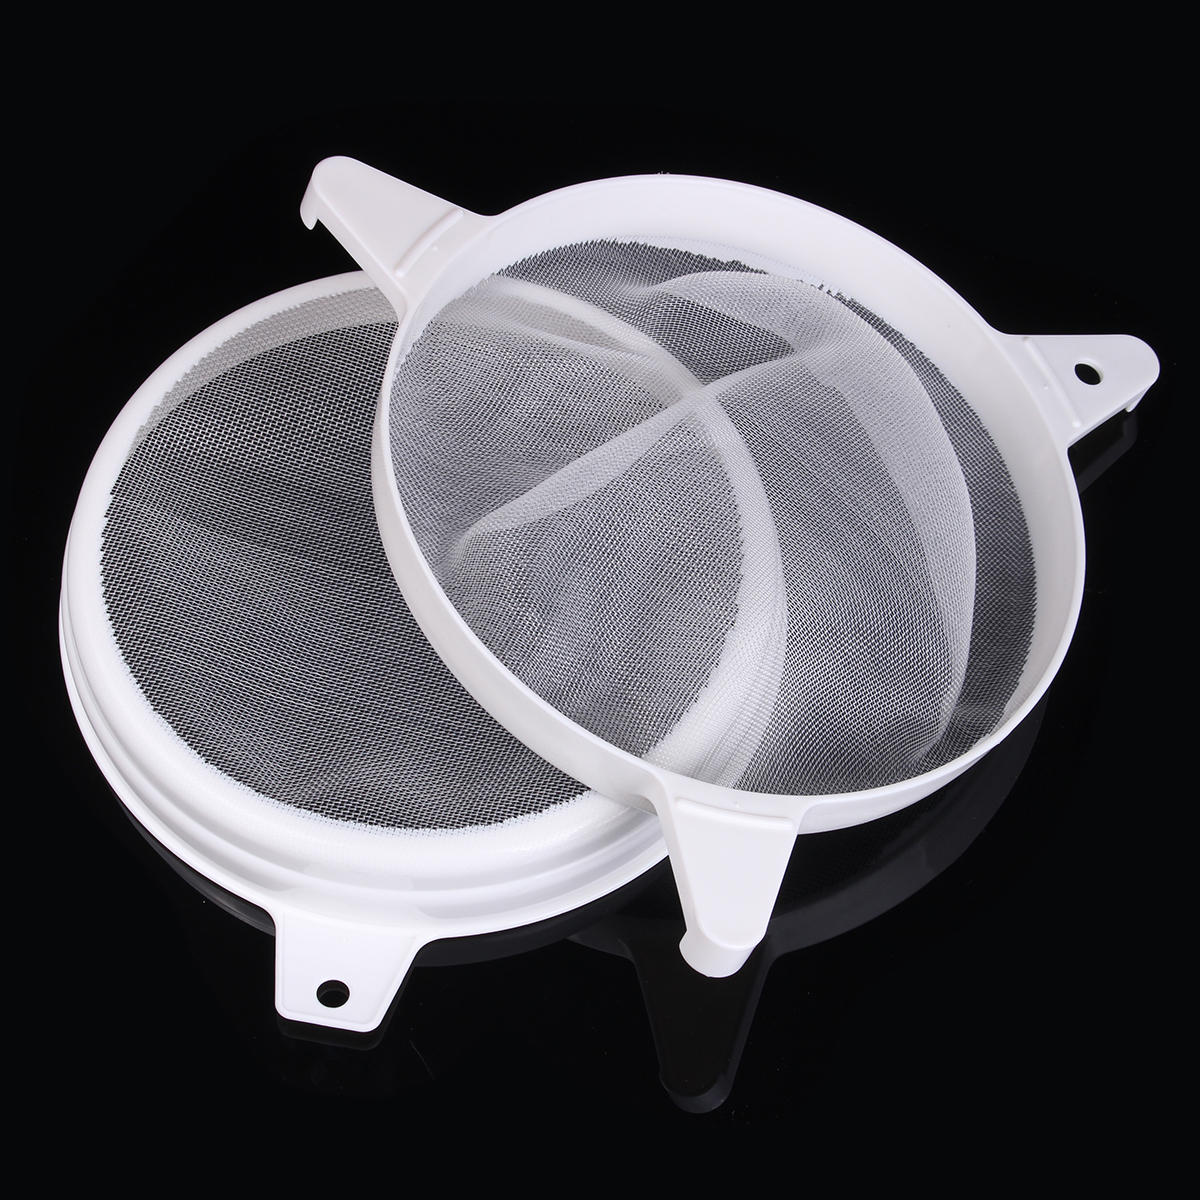 Double Honey Sieve Filter Beekeeping Strainer Apiary Equip Stainless Steel ZB 